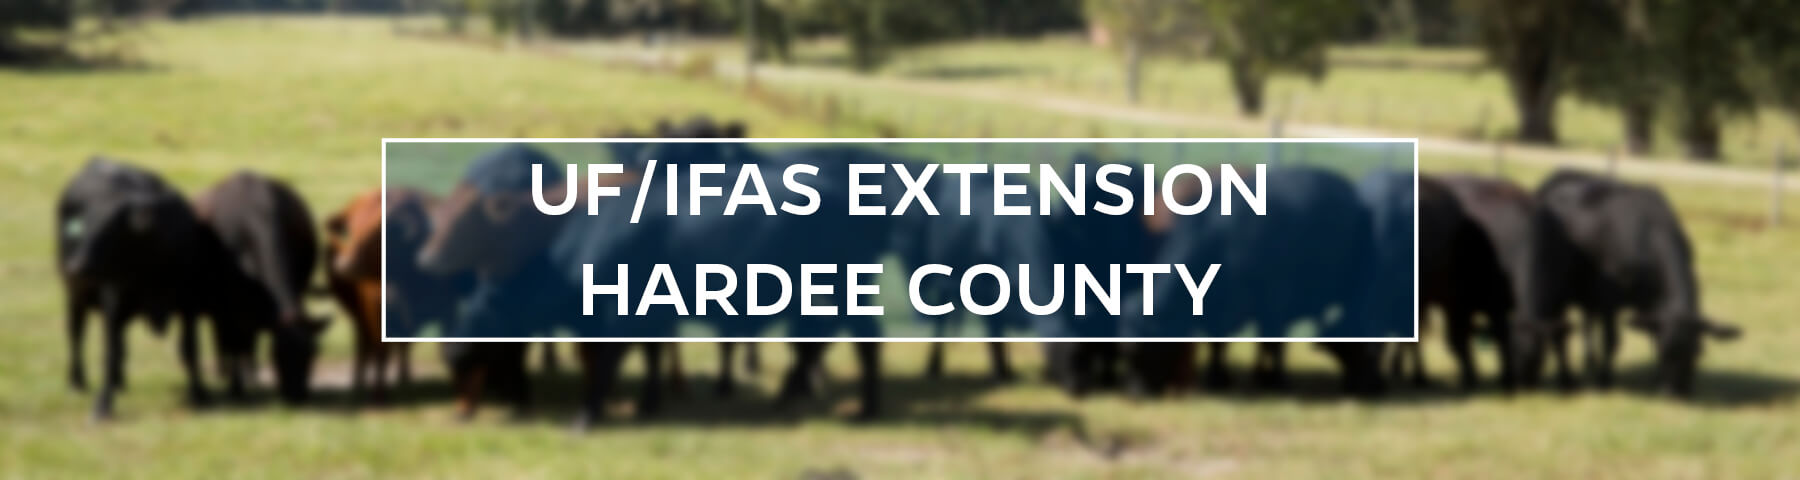 UF/IFAS Extension Hardee County